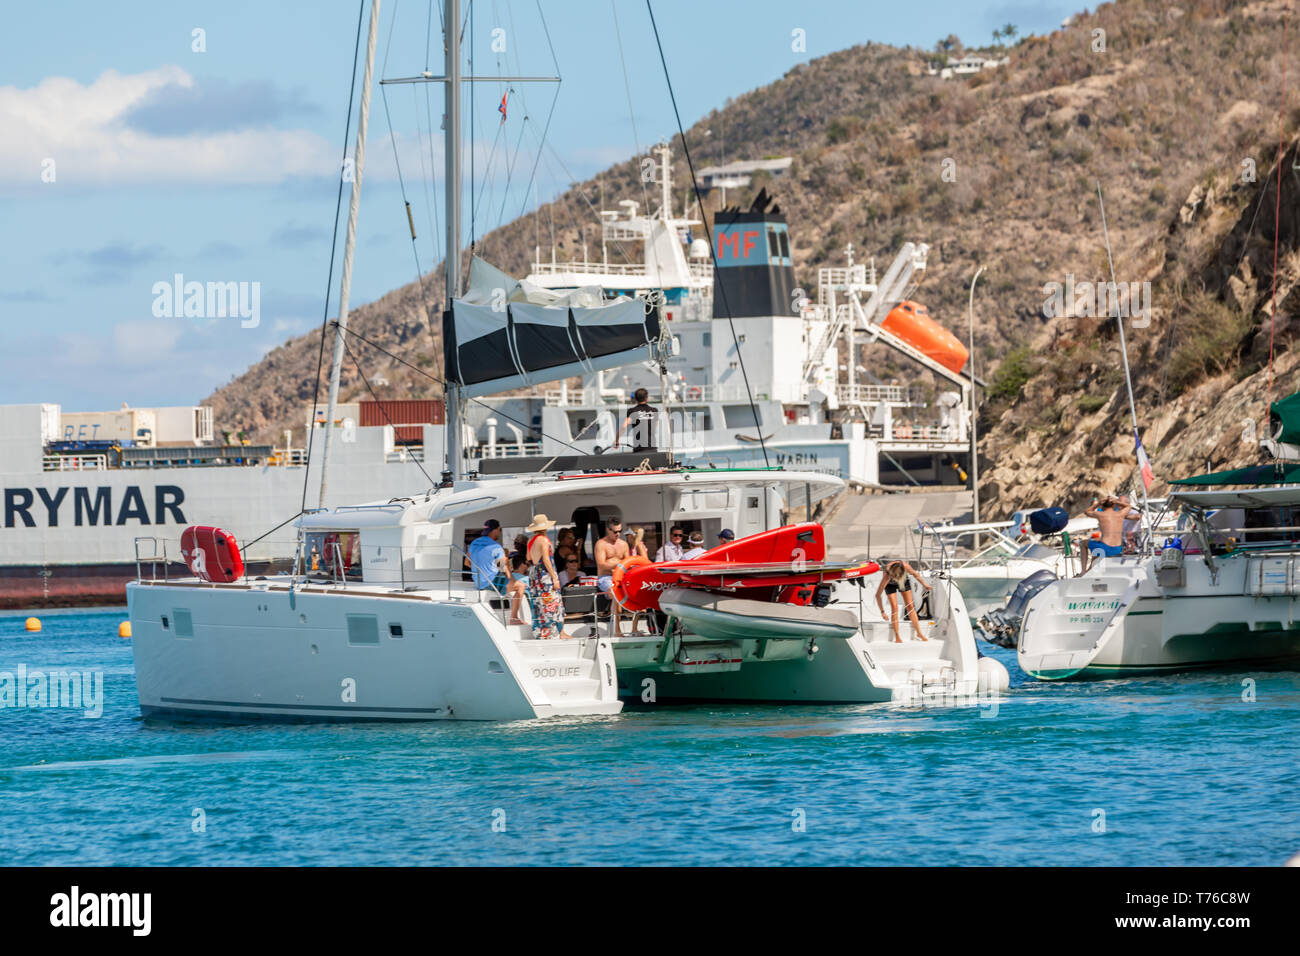 sail boat with people on board, Gustavia, St Barts Stock Photo